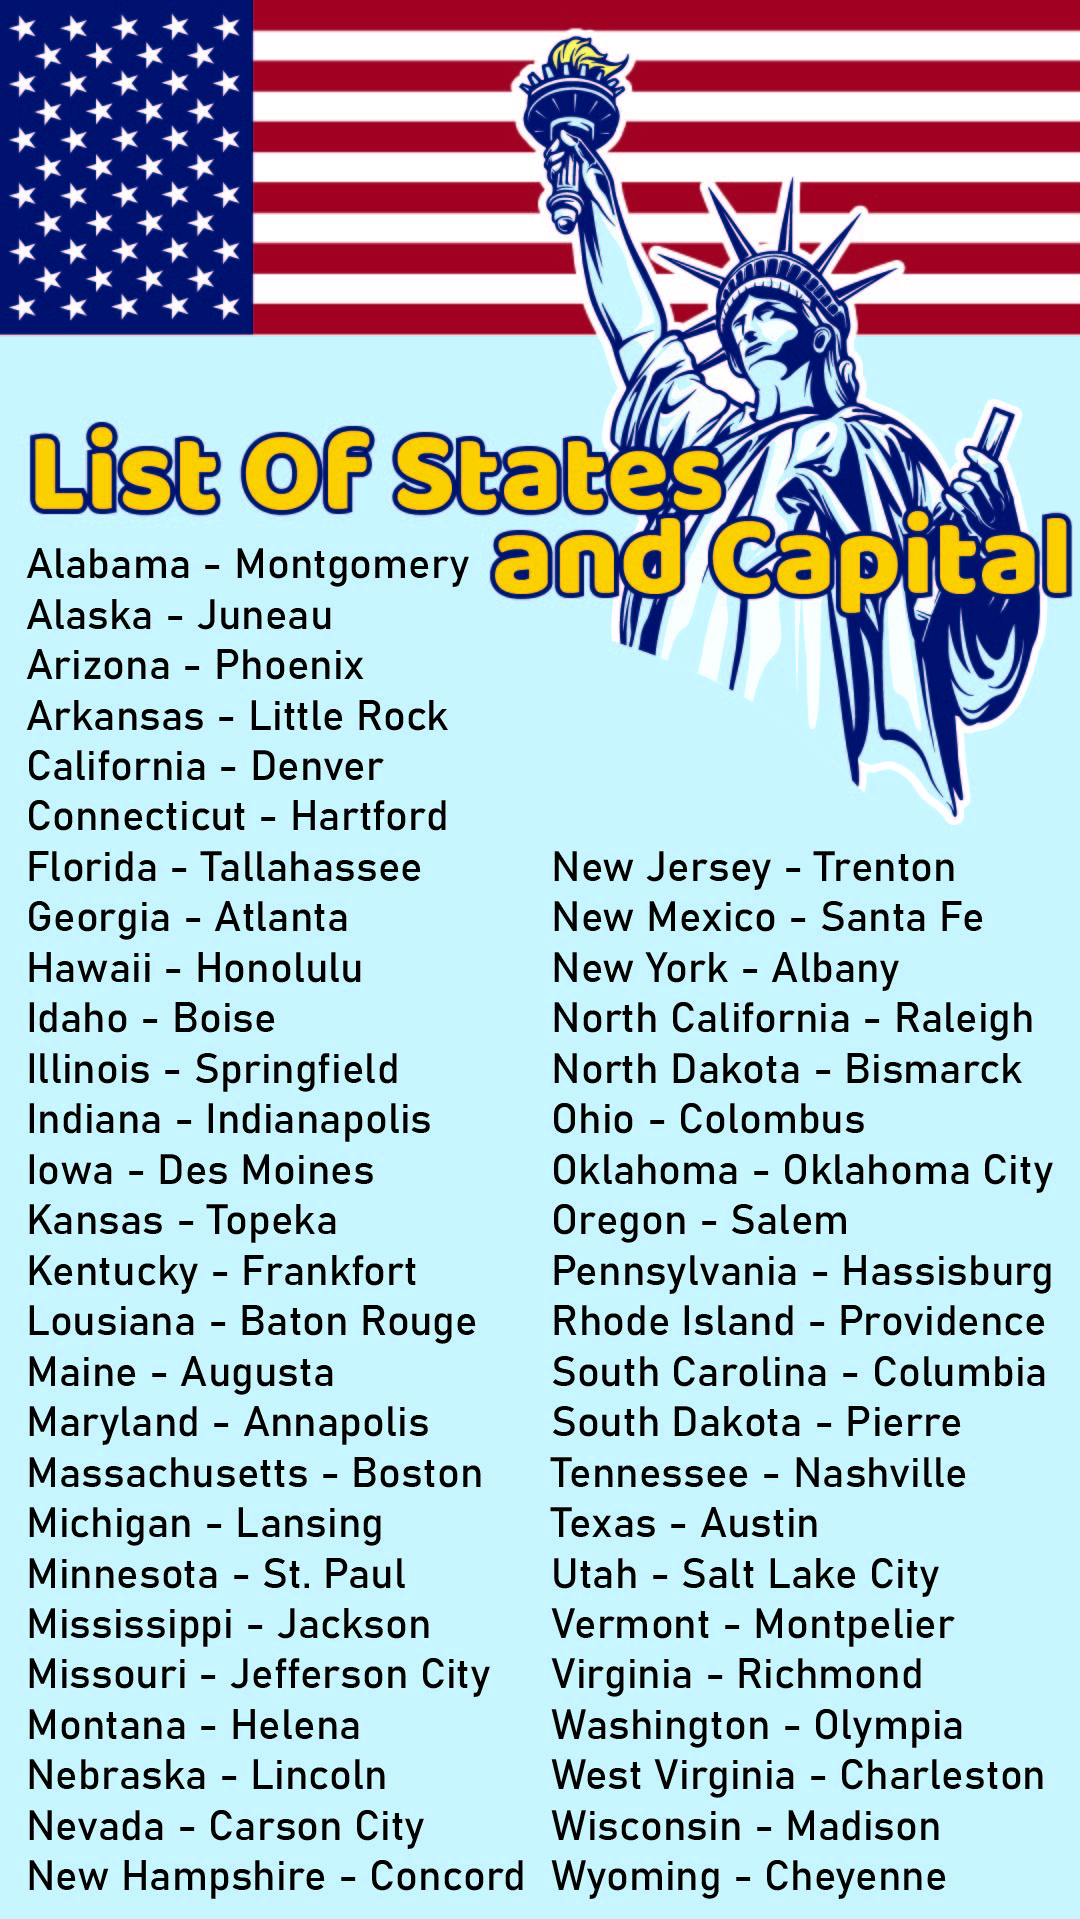 Alphabetical Order Printable List Of 50 States And Capitals U S A Images